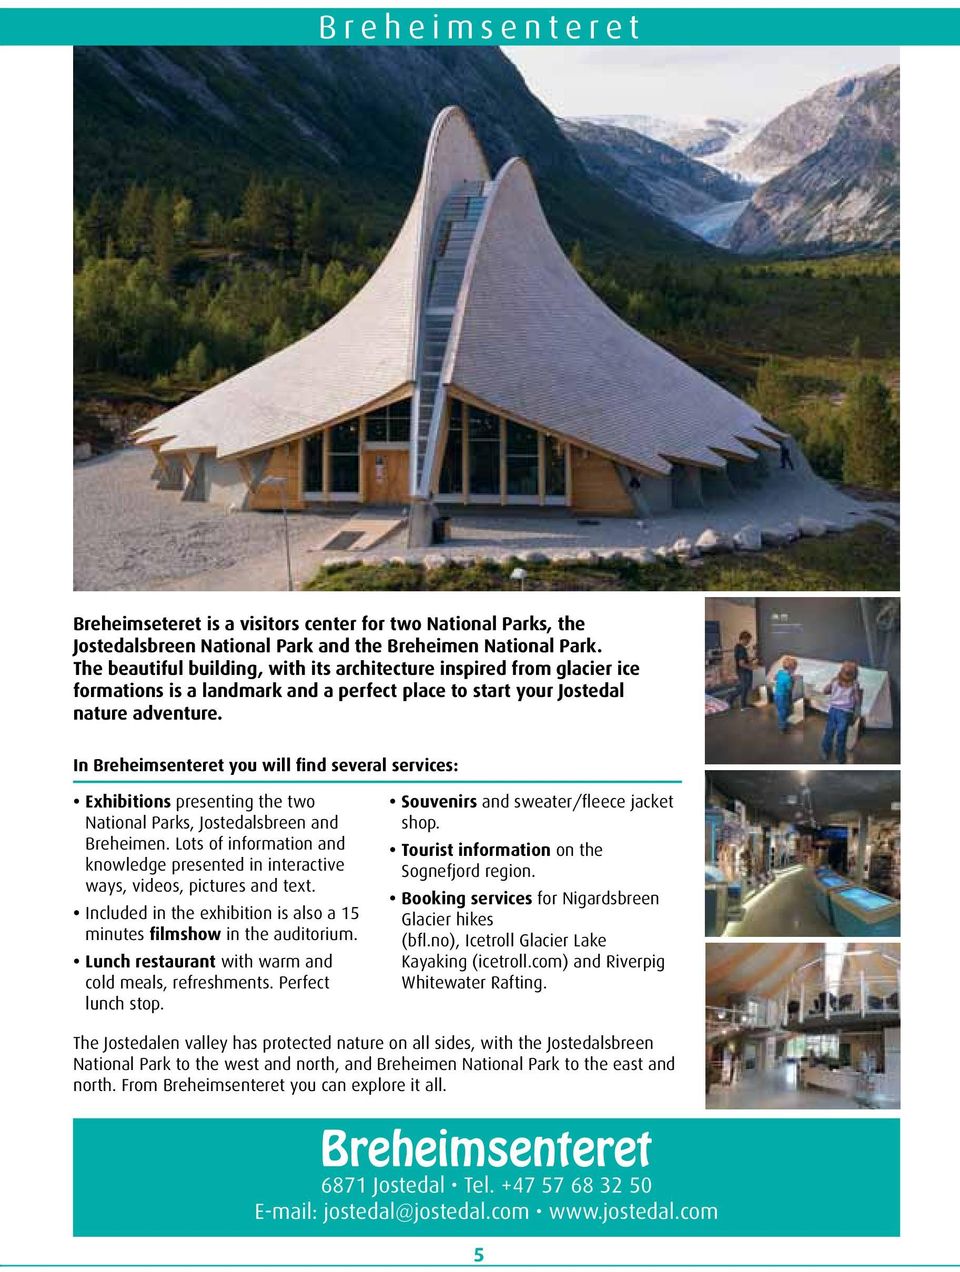 In Breheimsenteret you will find several services: Exhibitions presenting the two National Parks, Jostedalsbreen and Breheimen.